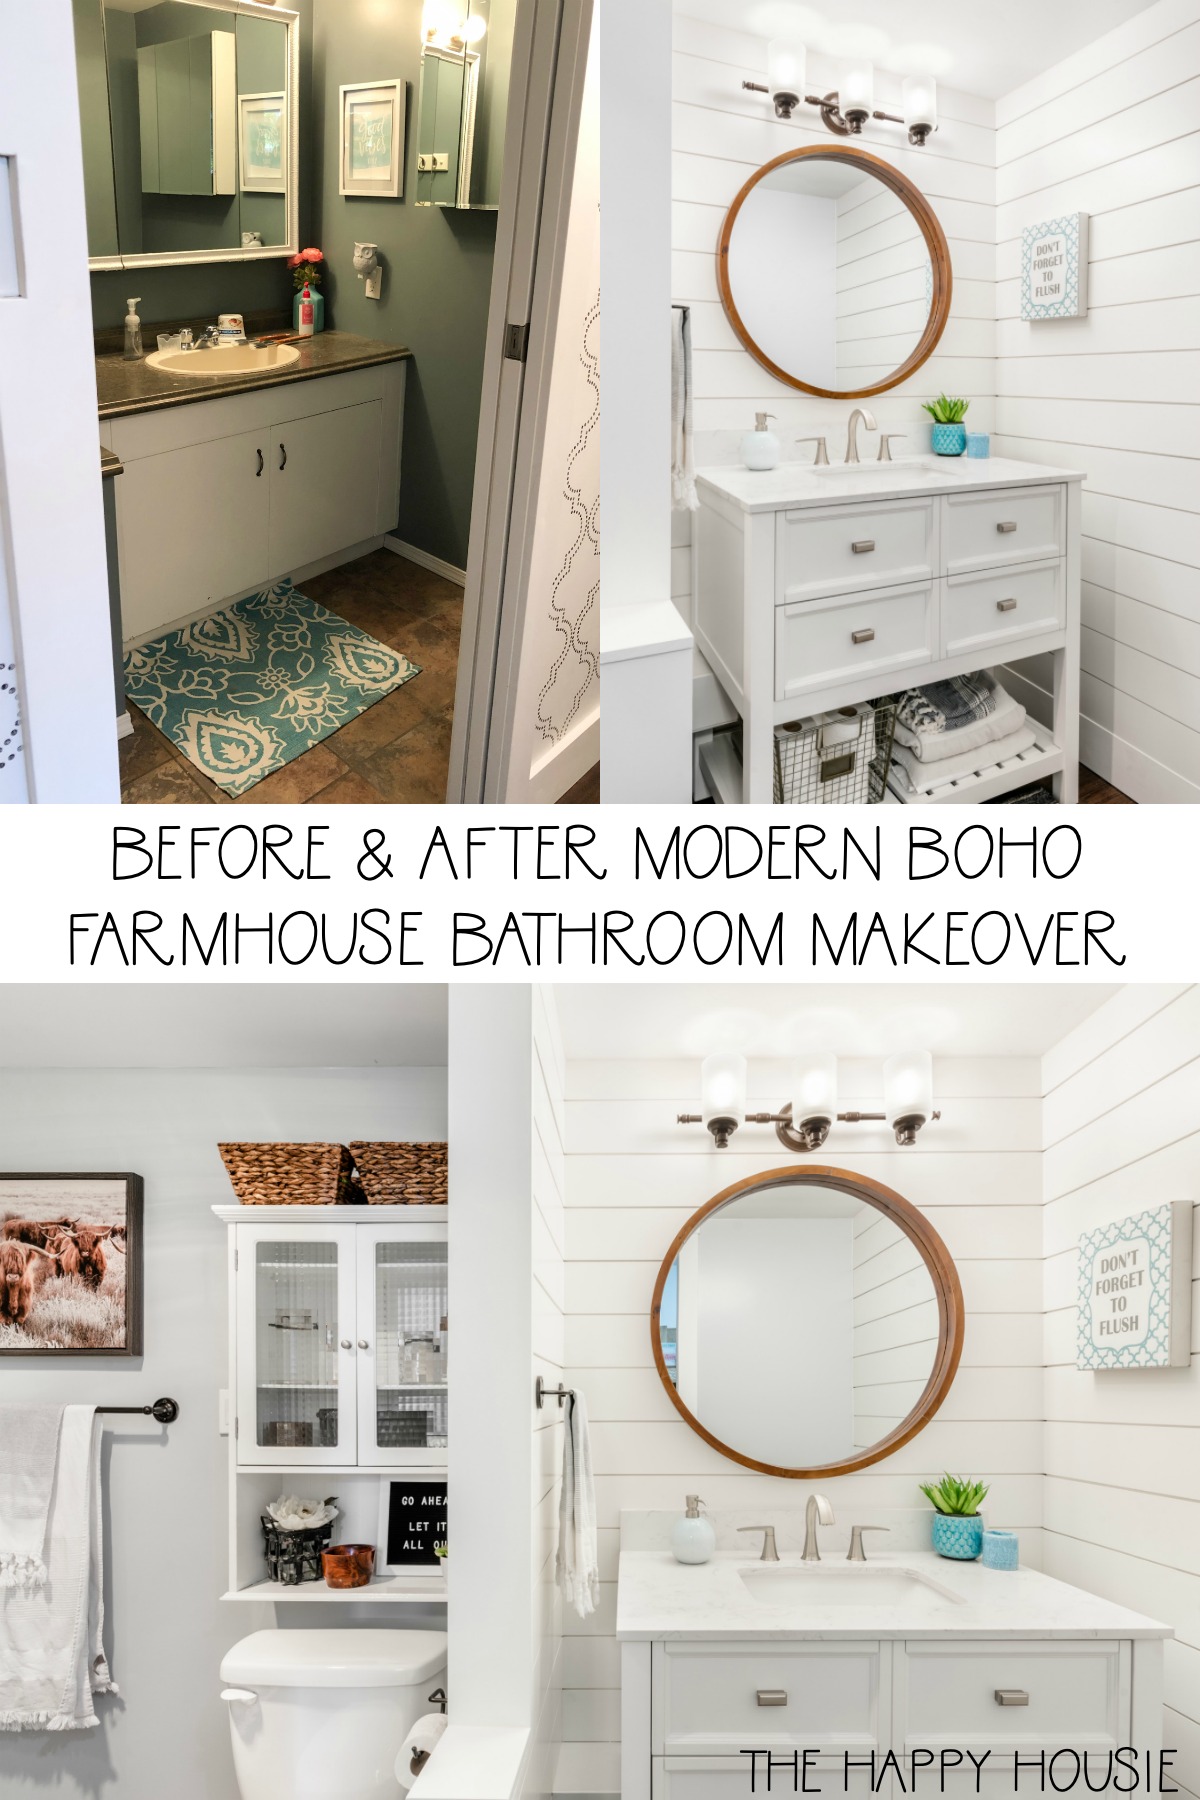 Before and After Modern Boho Farmhouse Bathroom Makeover poster.